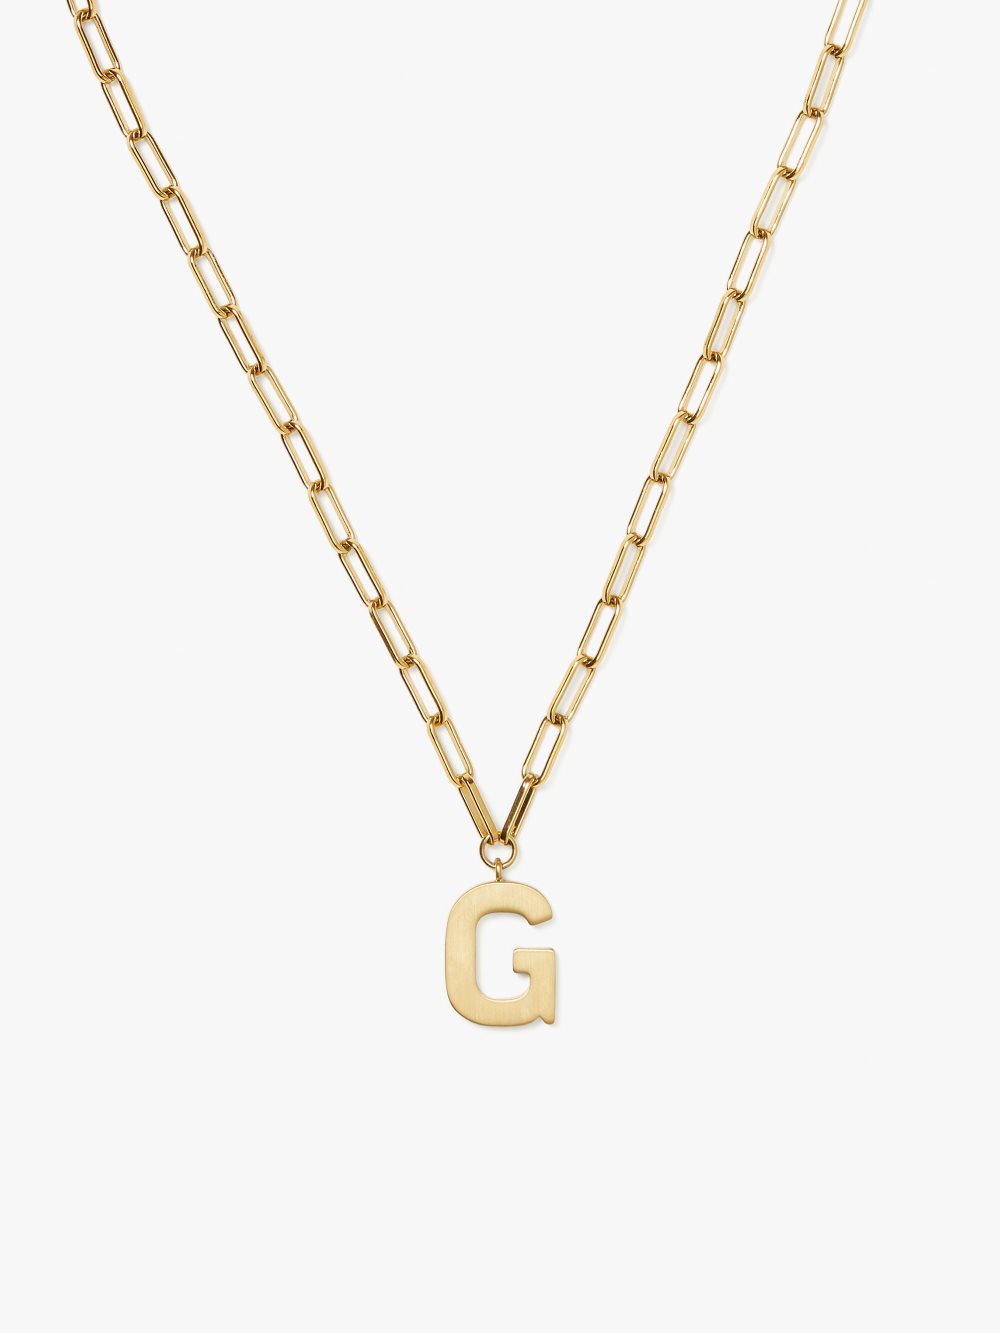 Women's gold. g initial this pendant | Kate Spade